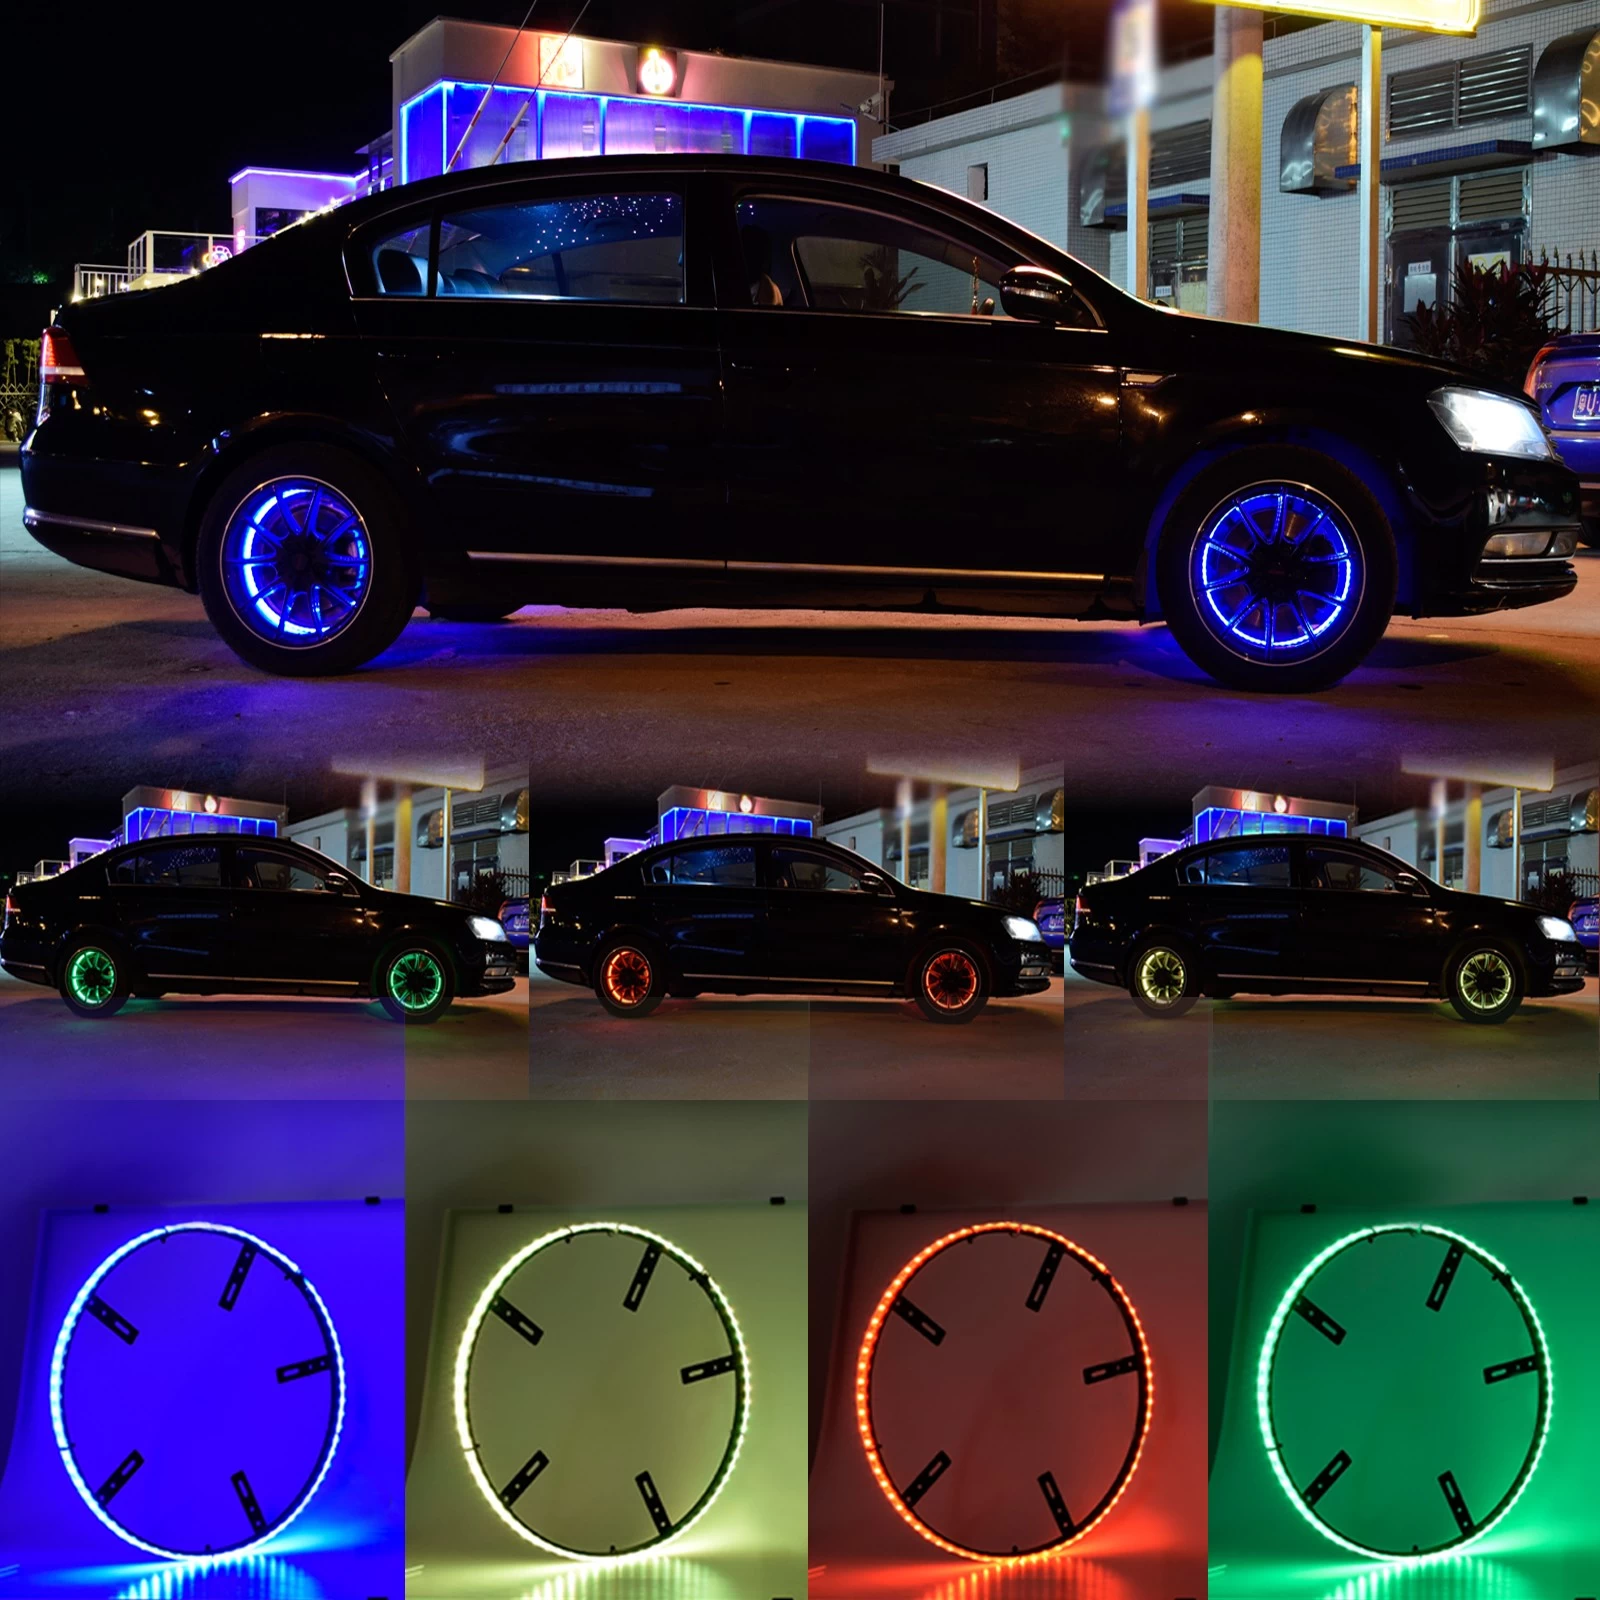 China Unionlux 14.5" 15.5inch LED Wheel Ring Light Kit RGB LED Wheel Ring Light Kit Tire Lights Turn Signal And Braking Function Can Controlled By Bluetooth Multi Mode Color Waterproof Hersteller